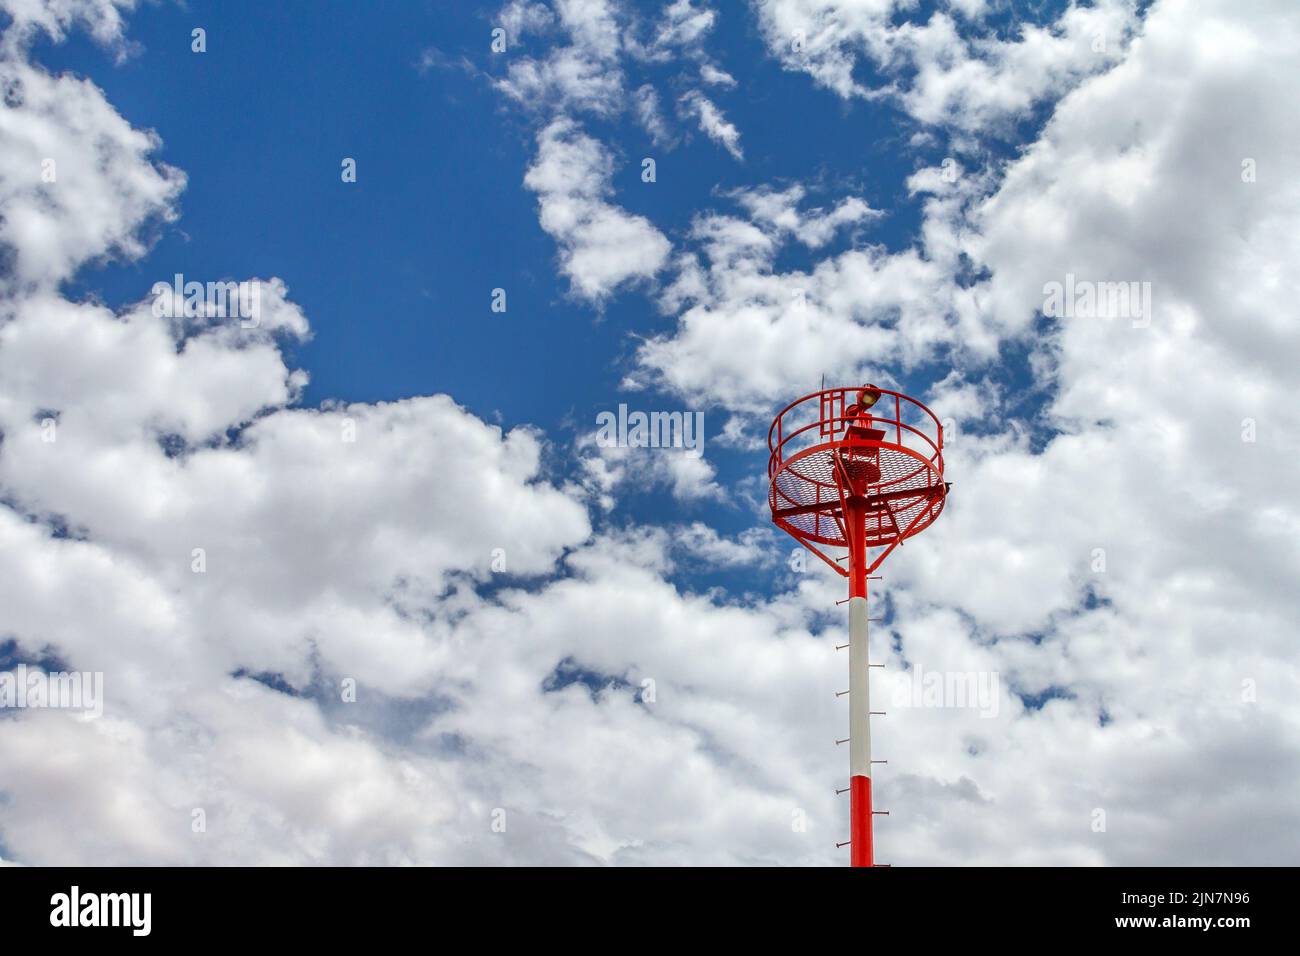 Red and white signal tower at a airport with a cloudy sky Stock Photo